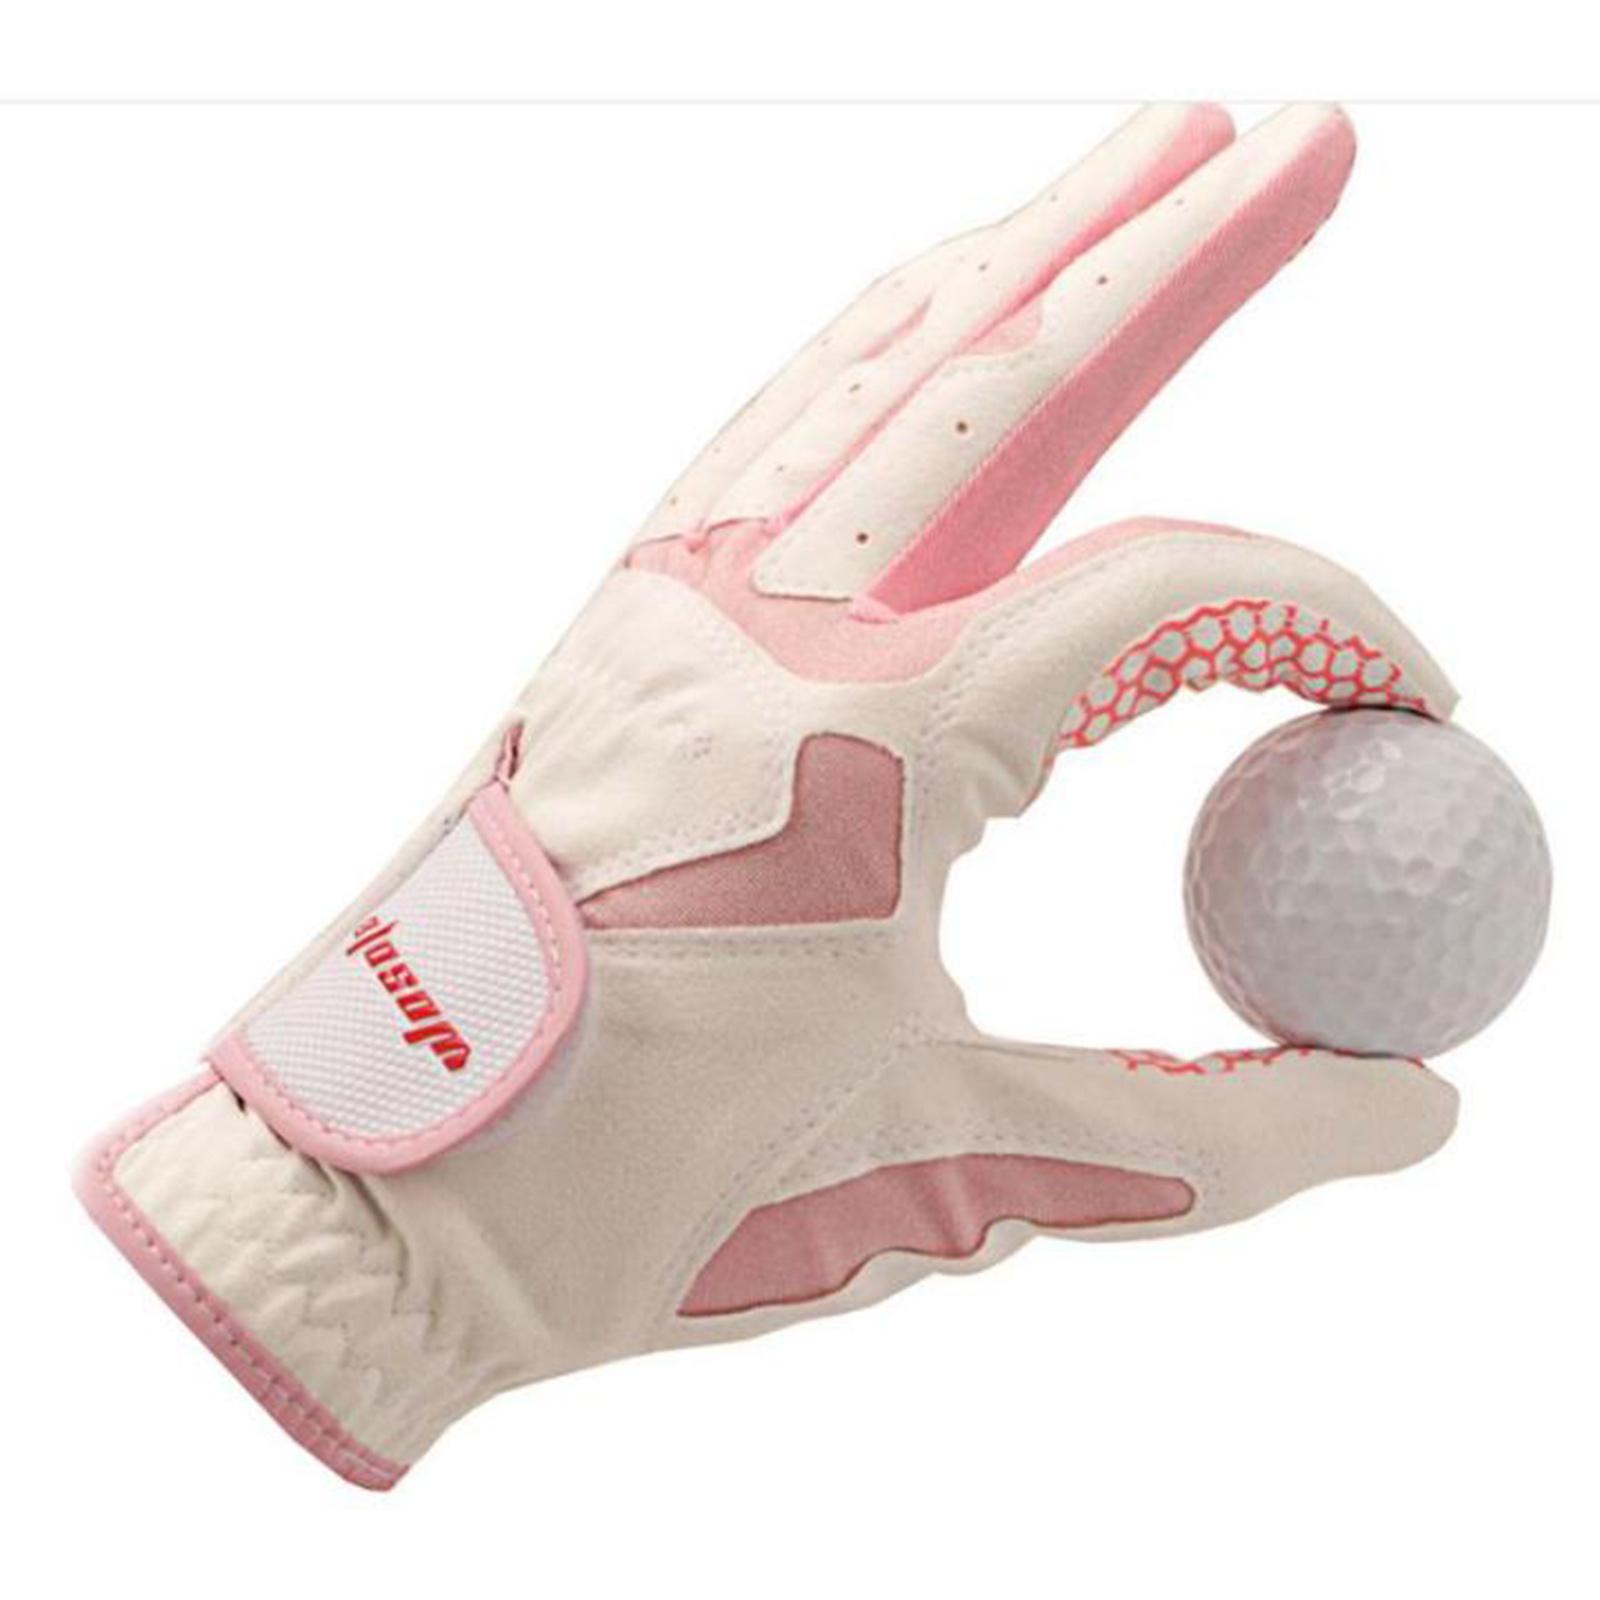 1 Pair Golf Glove Comfortable Synthetic Breathable Golf Equipment Women 19